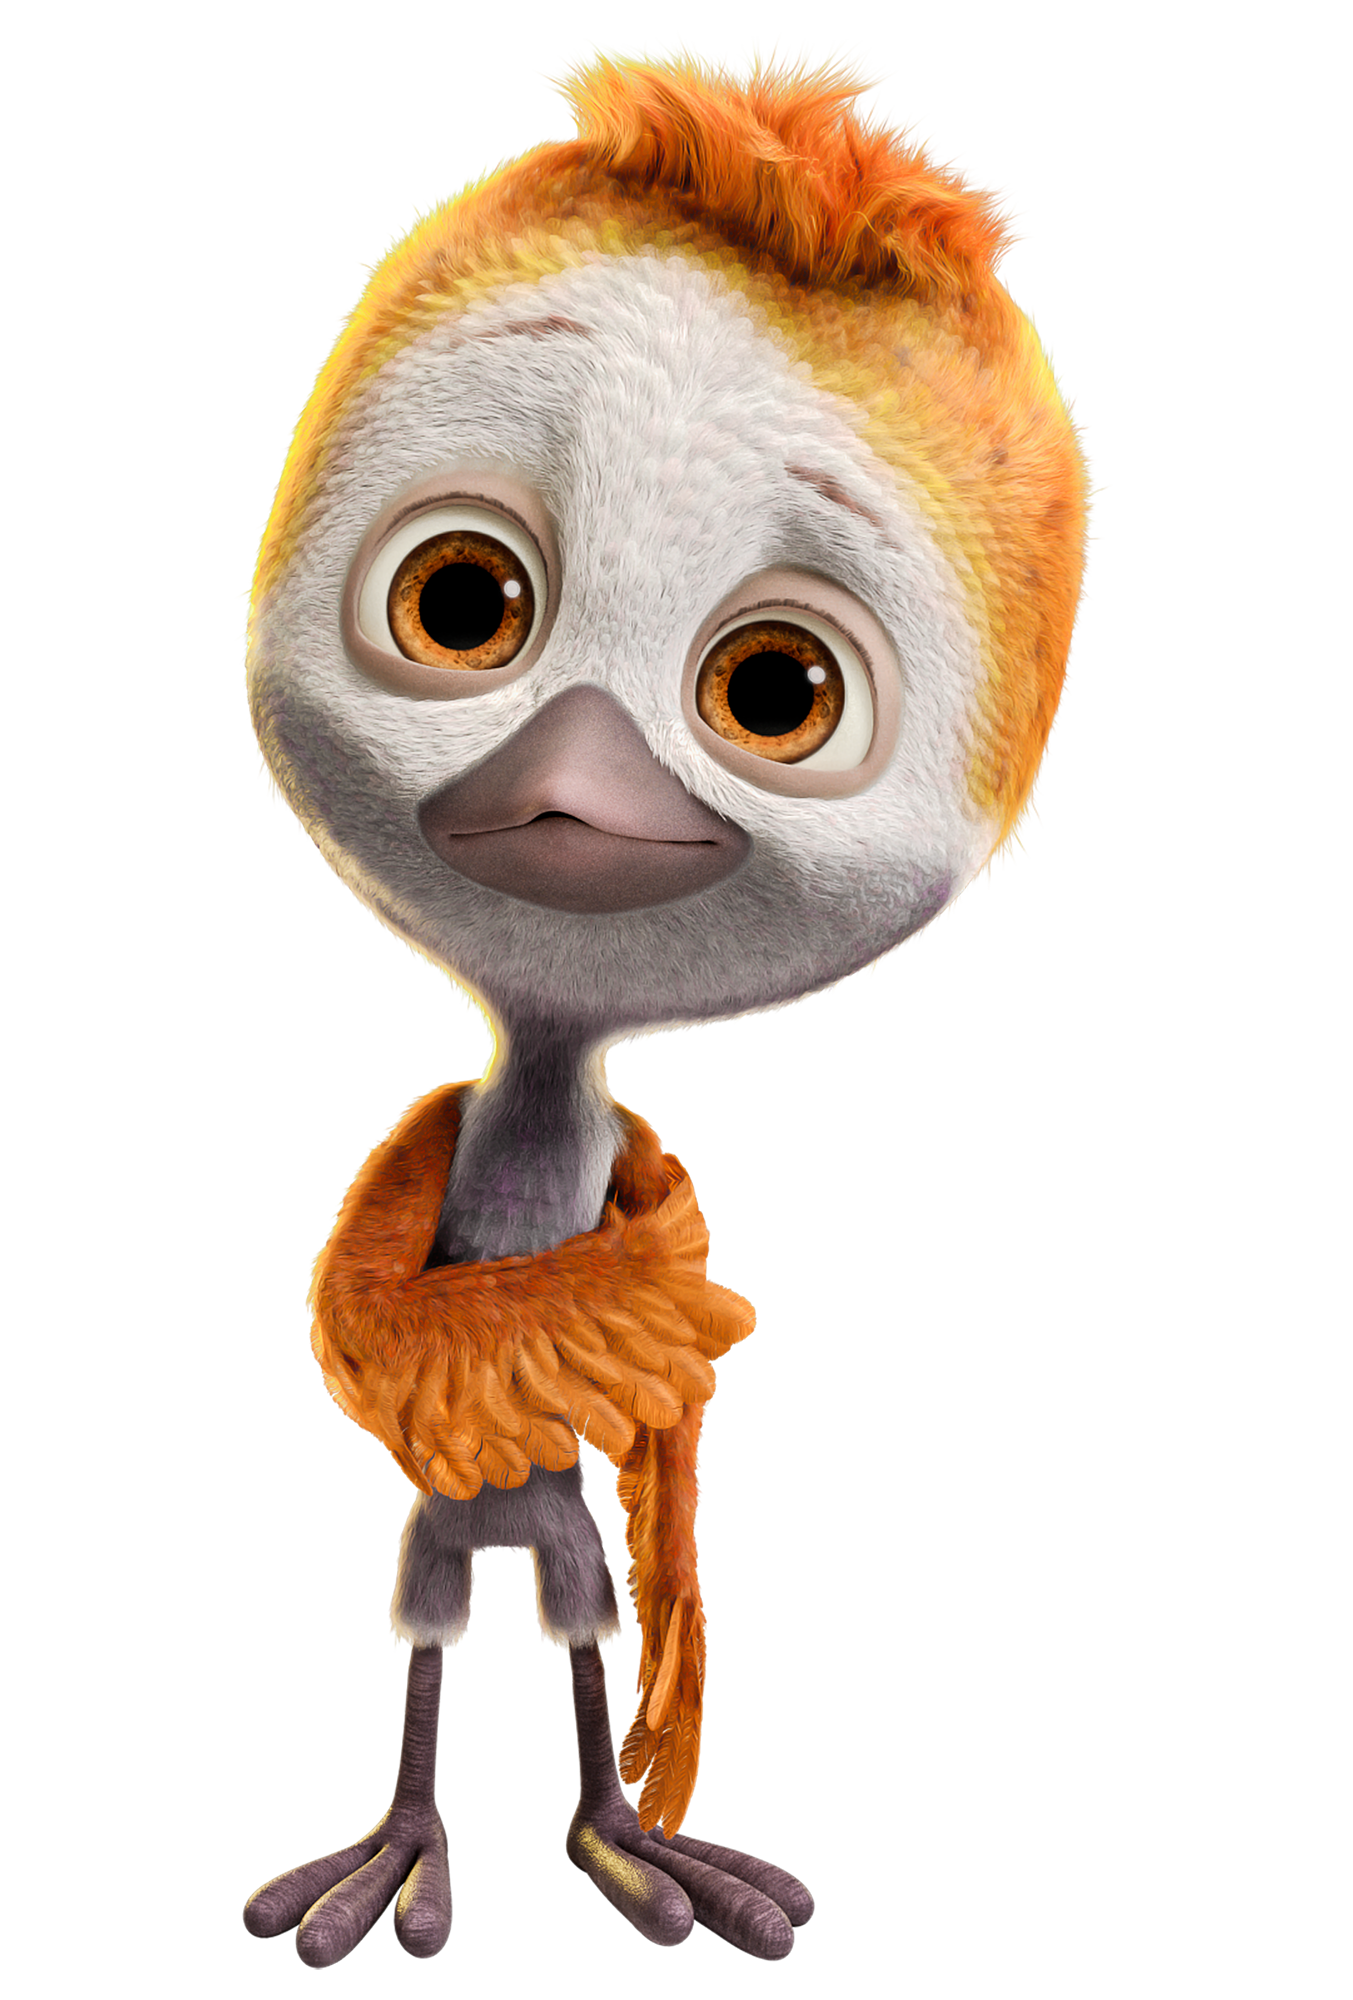 A character from the Ploey movie